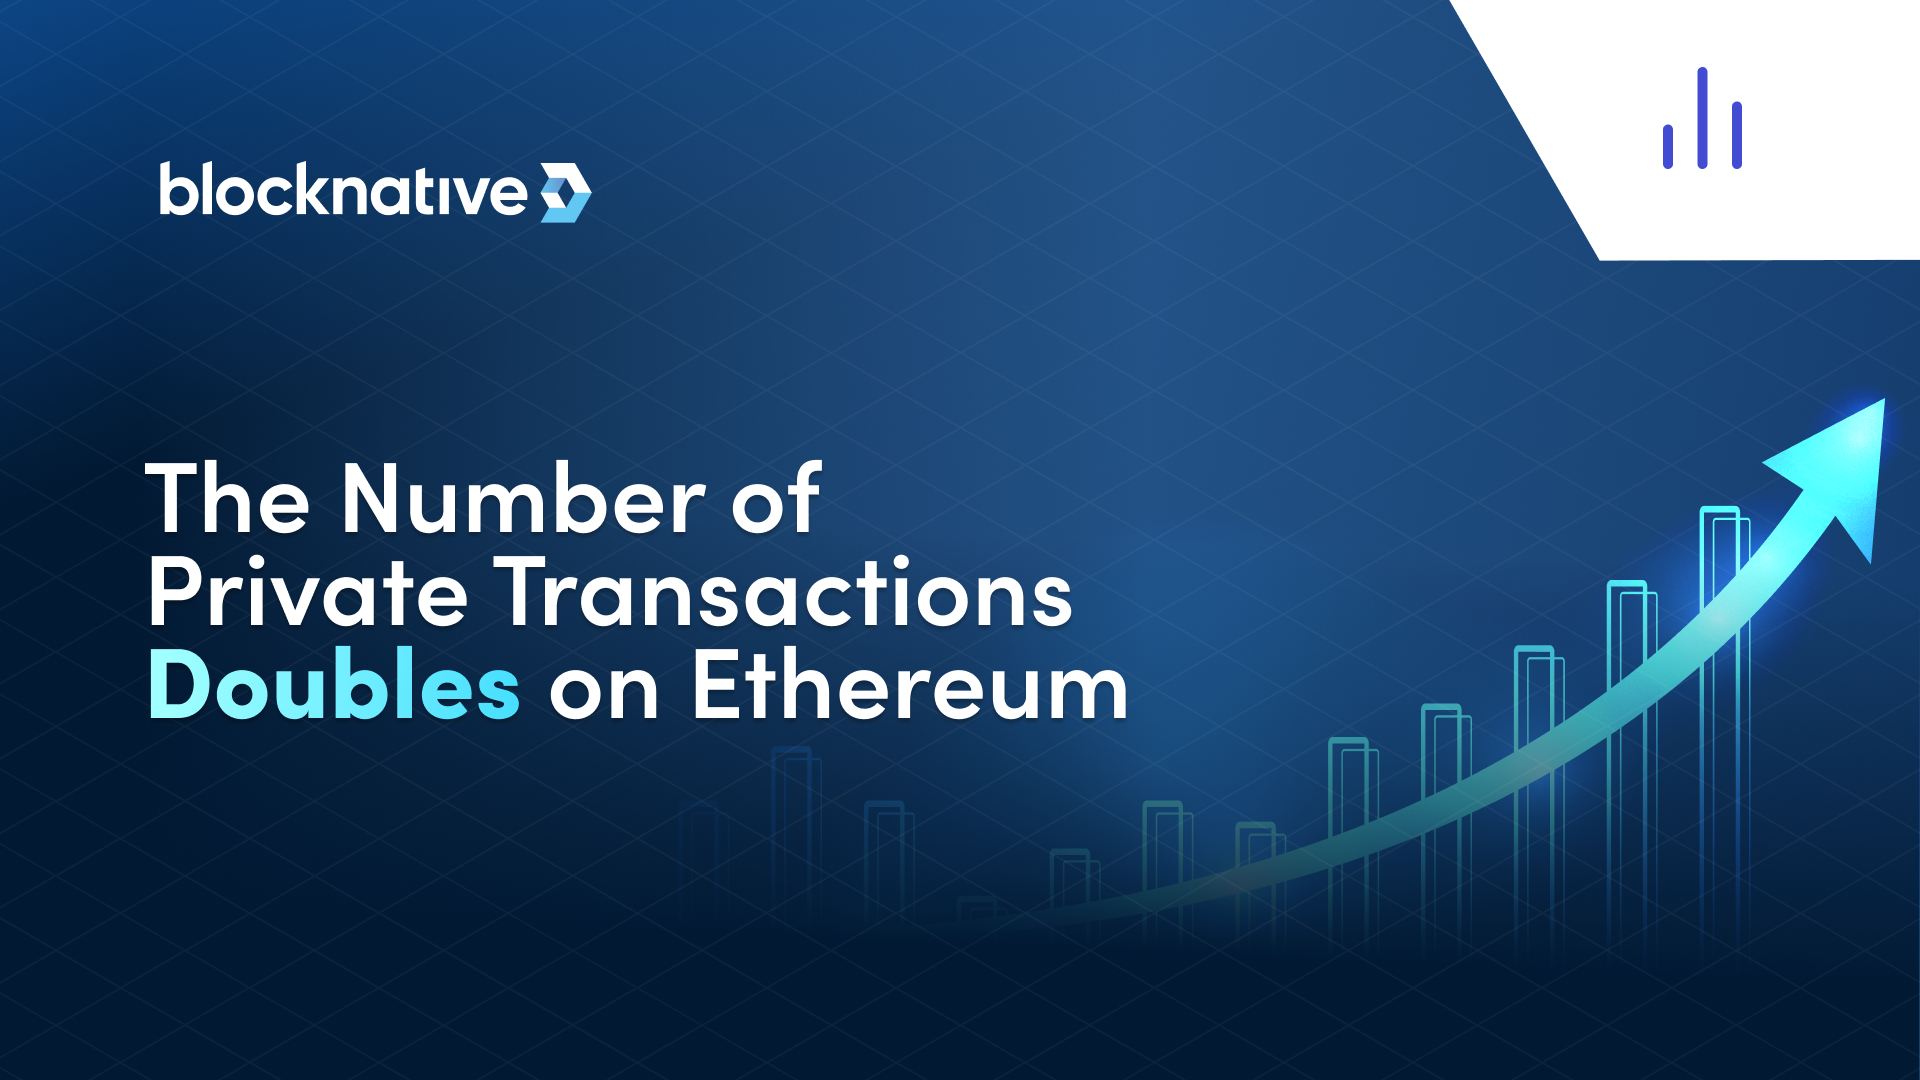 the-number-of-private-transactions-on-ethereum-doubles-in-last-quarter